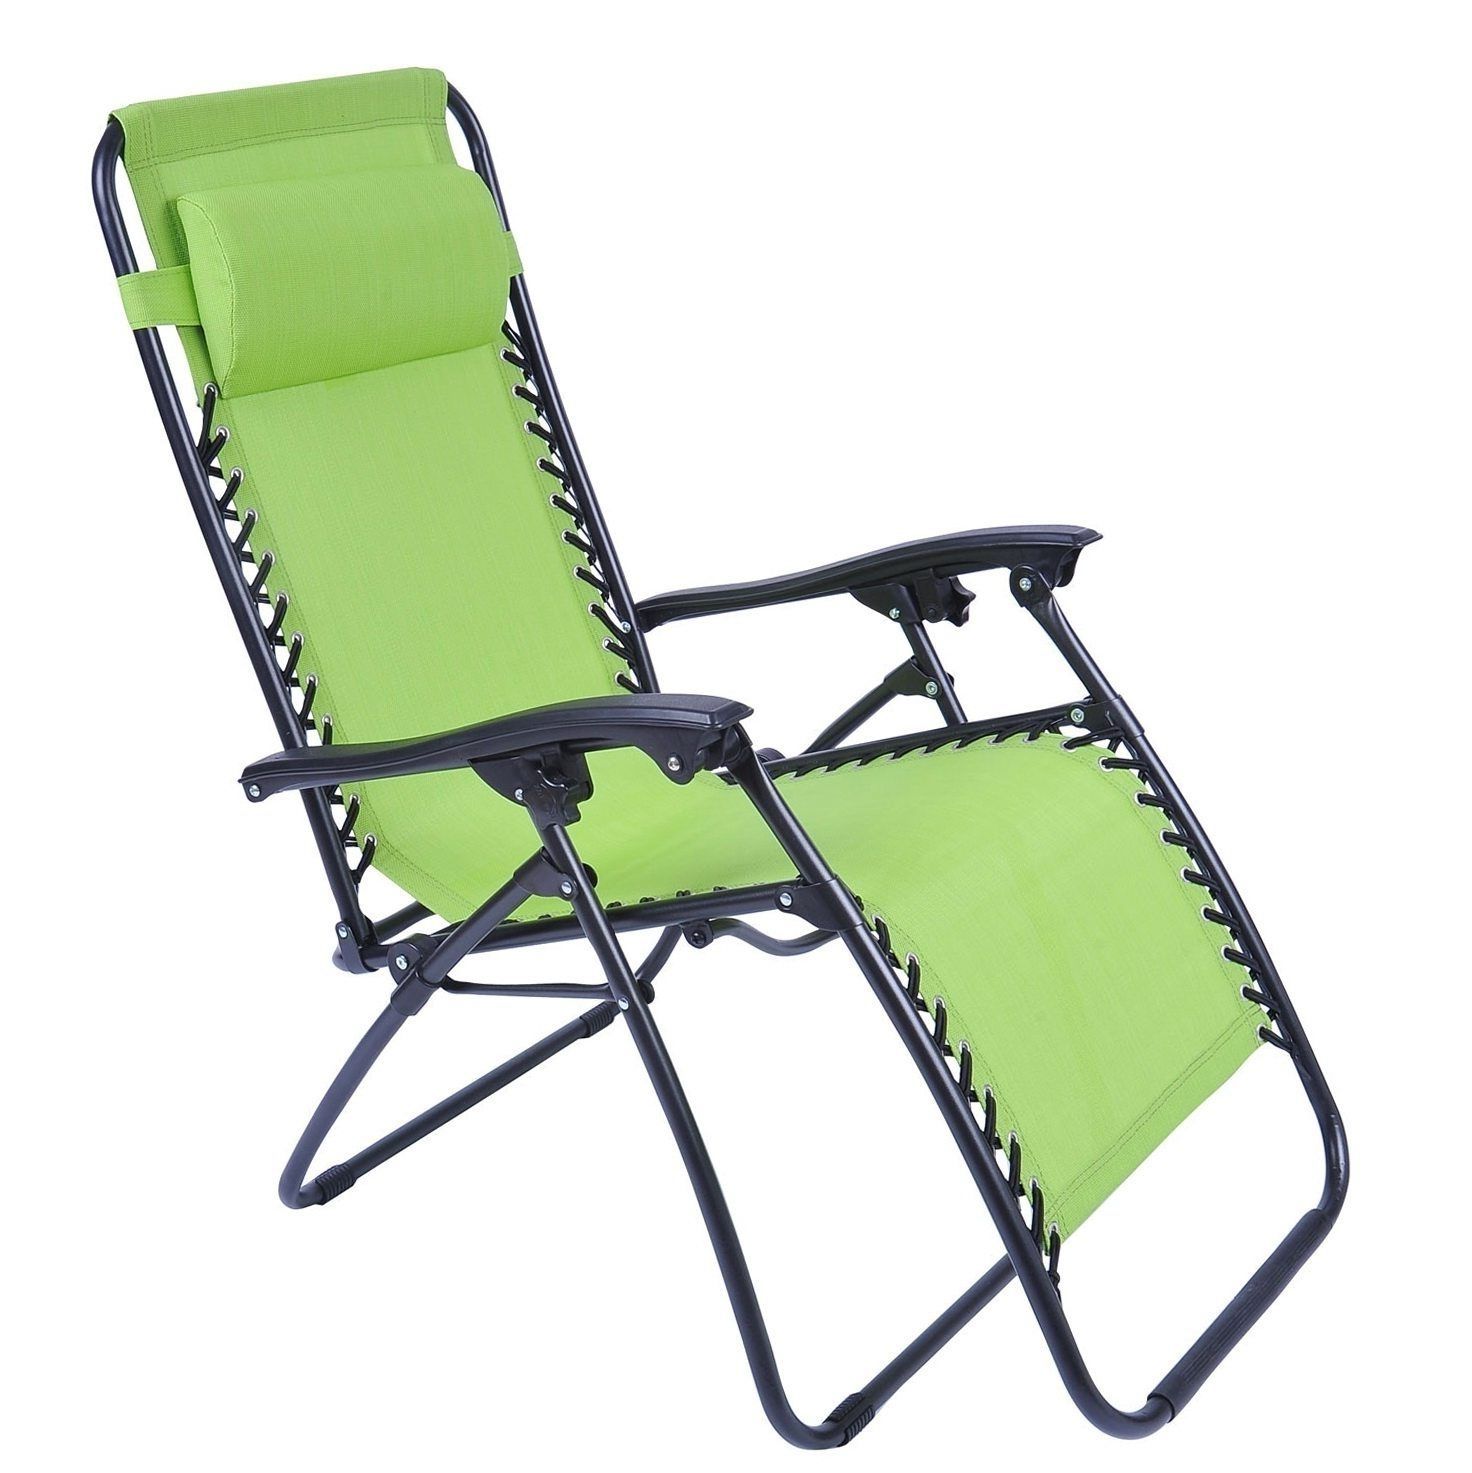 Adjustable Pool Chaise Lounge Chair Recliners Inside Latest Lounge Chair Outdoor Folding Folding Chaise Lounge Chair Patio (View 13 of 15)